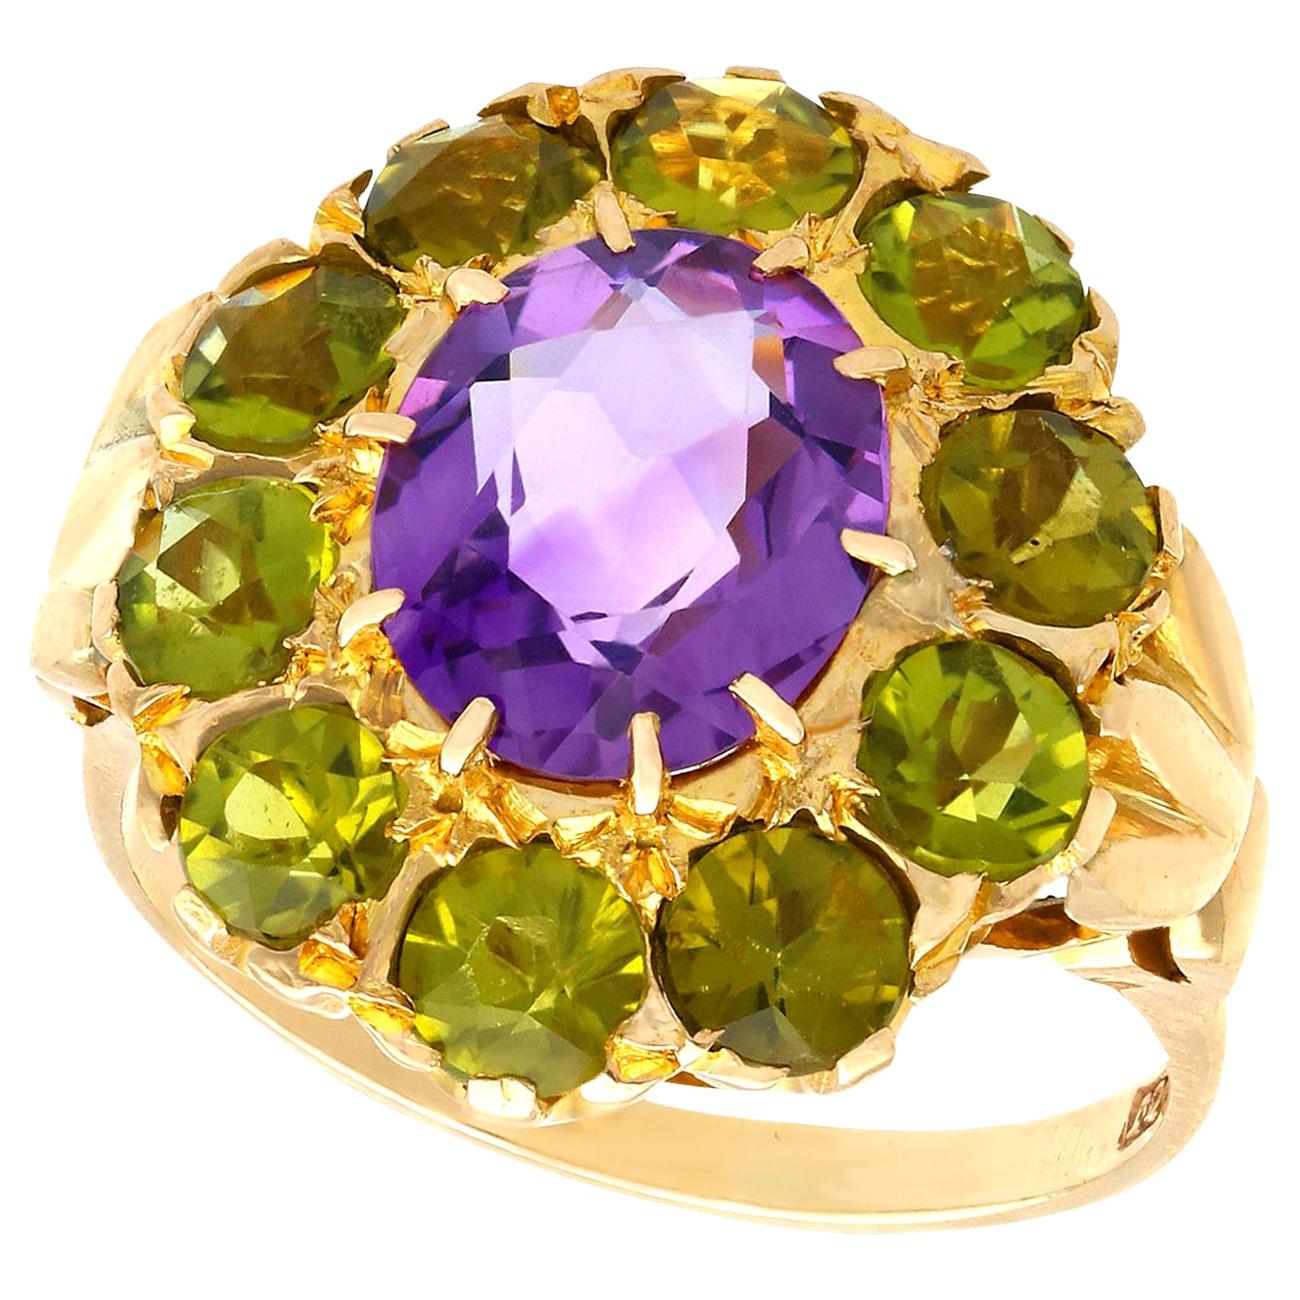 A stunning antique 2.41 carat amethyst and 2.56 carat peridot, 9 karat yellow gold cluster ring; part of our diverse antique jewelry and estate jewelry collections.

This stunning, fine and impressive antique Victorian Victorian amethyst and peridot